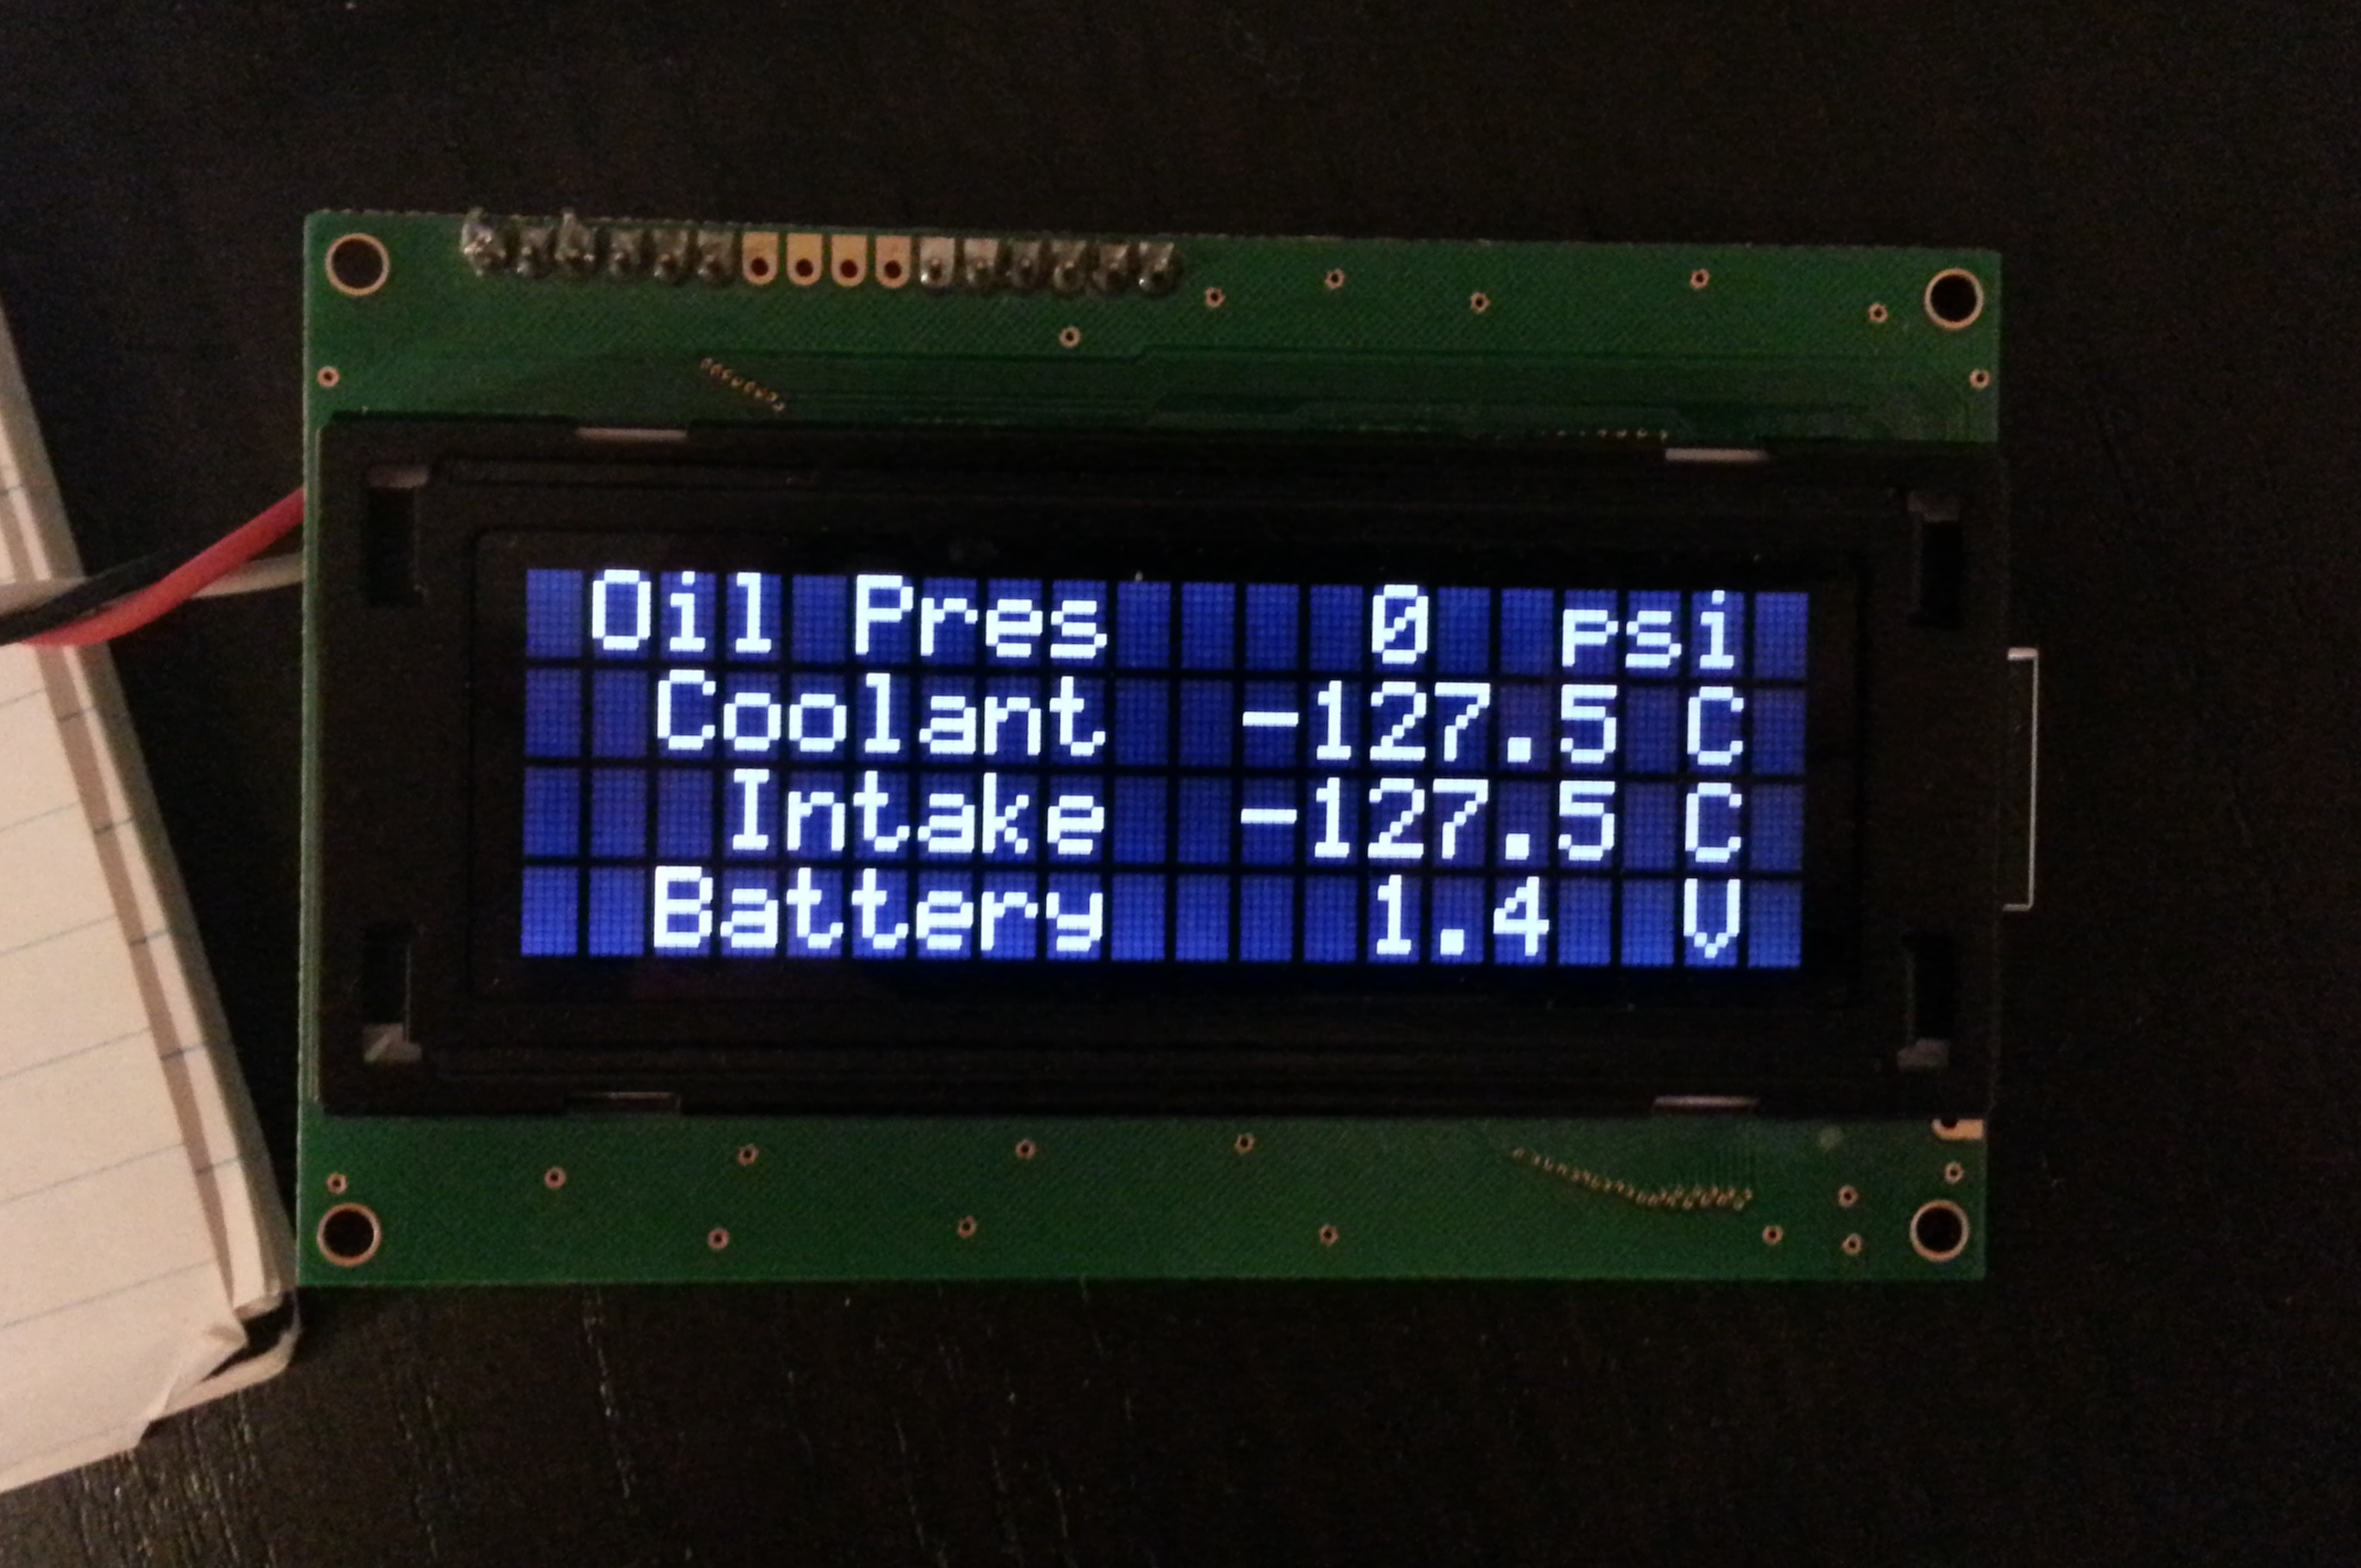 Engine monitor display without any sensors connected